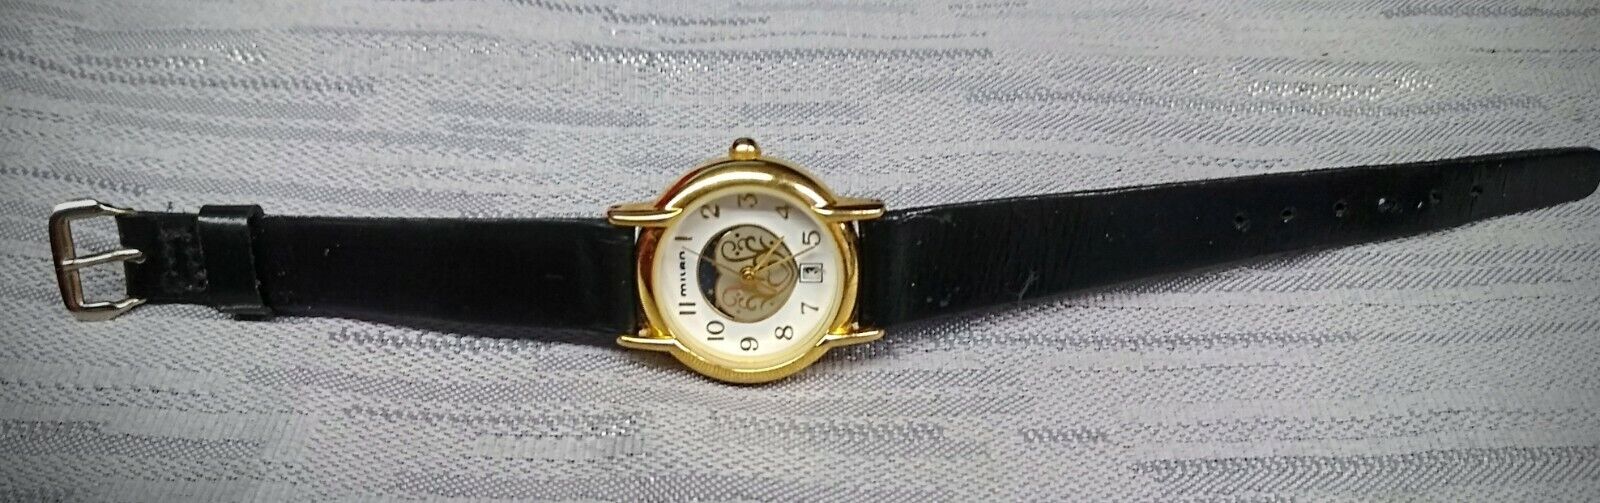 Vintage Milan Ladies Moon Dial Watch Gold Tone with Black Band New Battery Clean